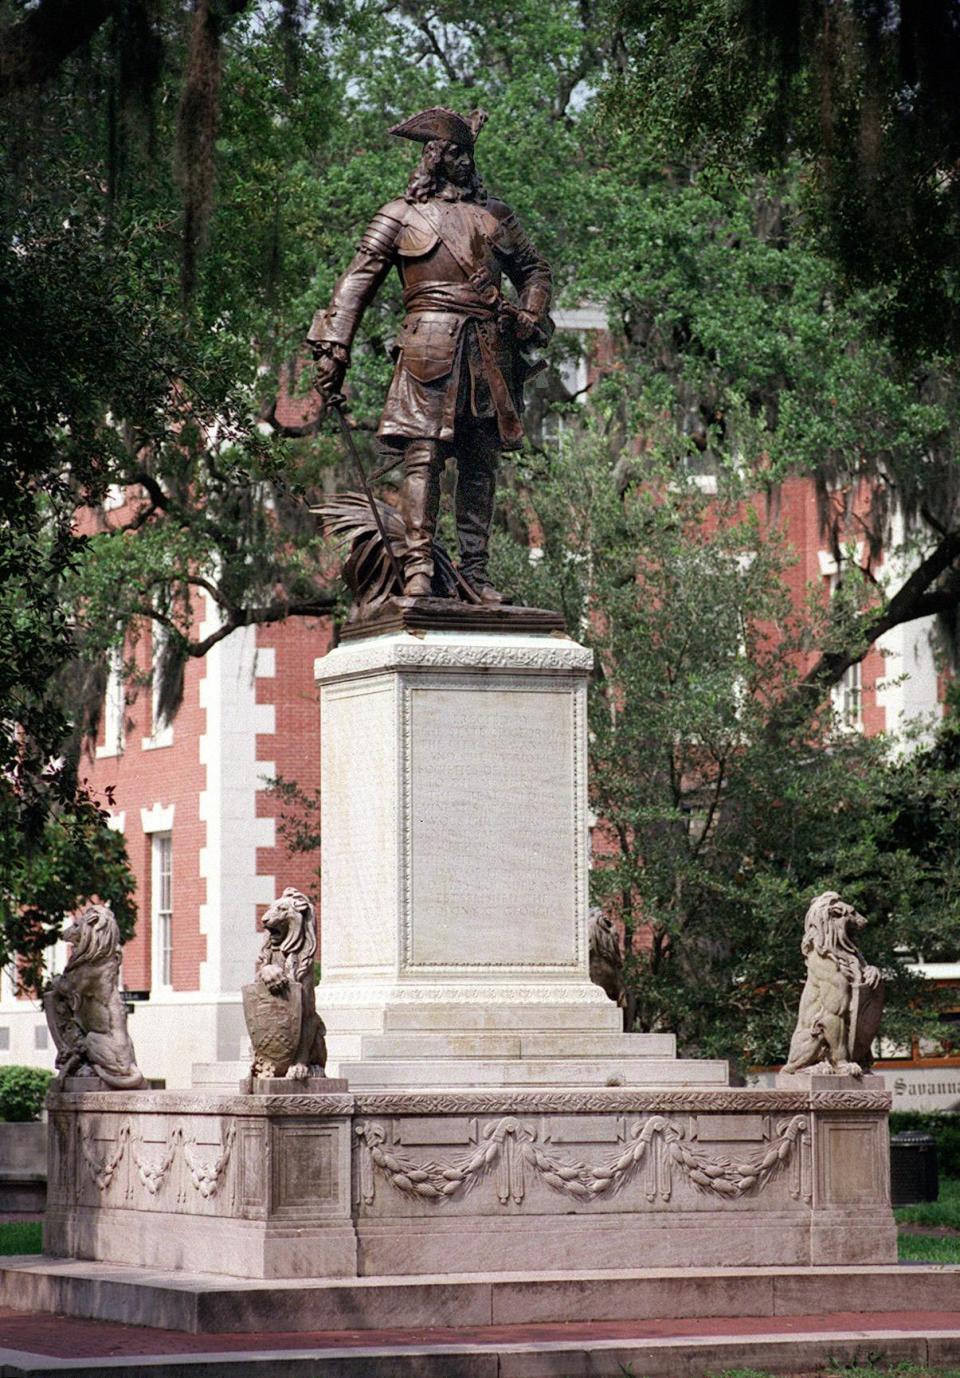 The bronze sculpture of Georgia's founder, General James Oglethorpe, was created by artist Daniel Chester French in 1910. It is said that Oglethorpe faces South in Chippewa Square to guard against the Spanish. General Oglethorpe statue in Chippewa Square.